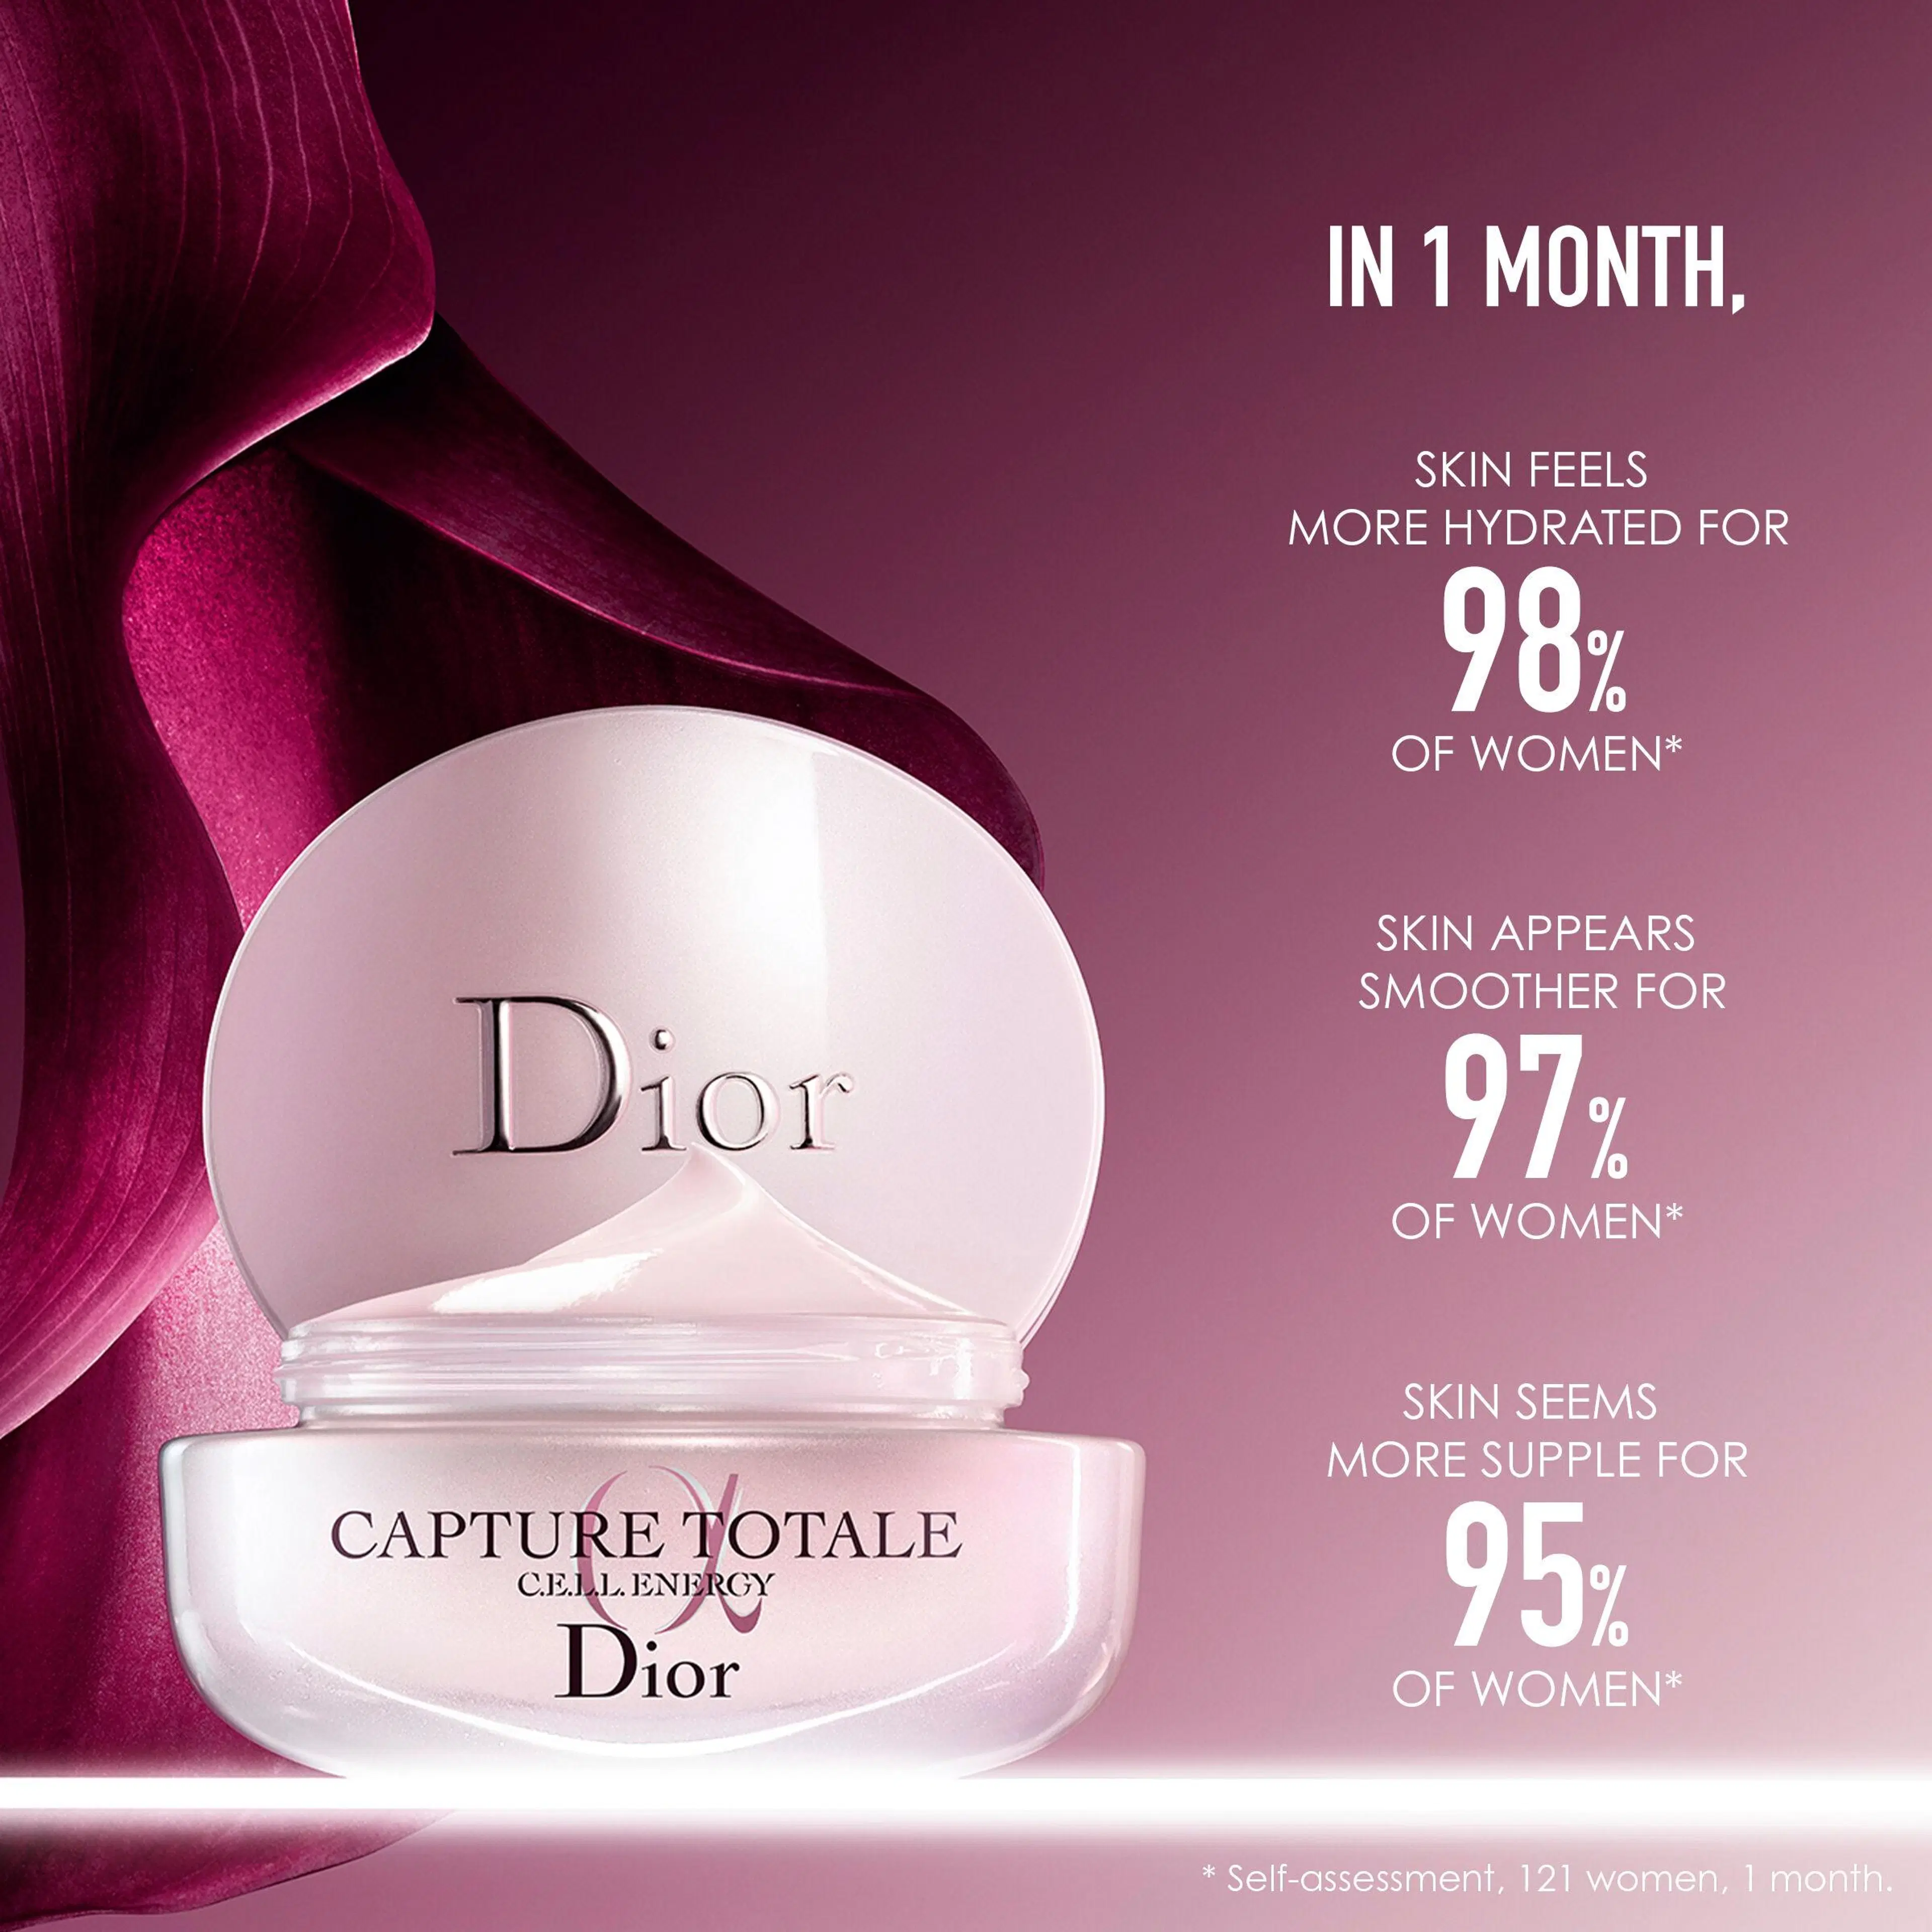 DIOR Capture Totale C.E.L.L. ENERGY Firming & Wrinkle-Correcting Creme kasvovoide 50 ml